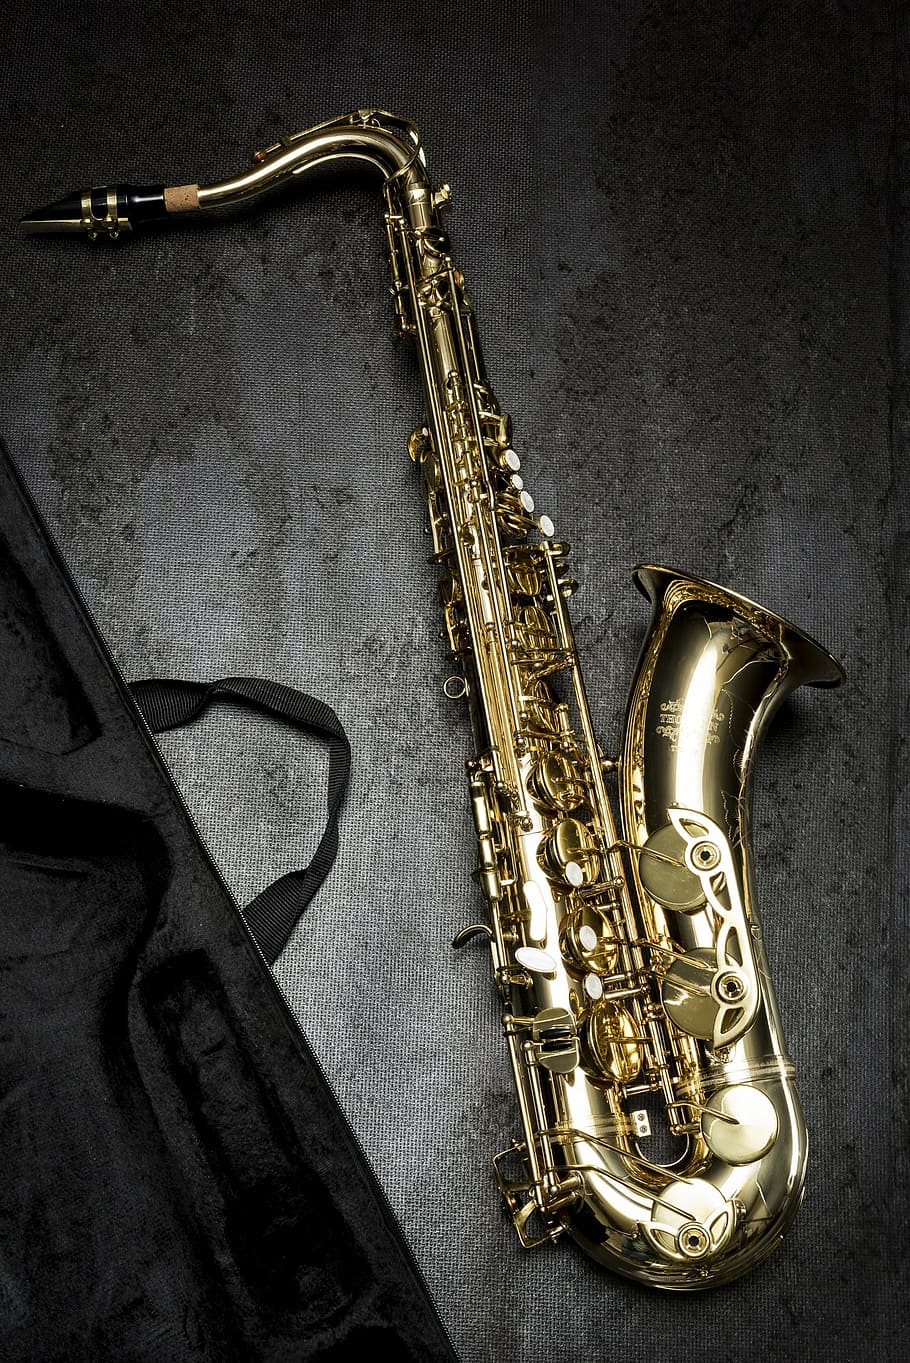 gold saxophone, saxophone, music, still life, musical instrument, arts culture and entertainment, metal, indoors, wind instrument, wall - building feature